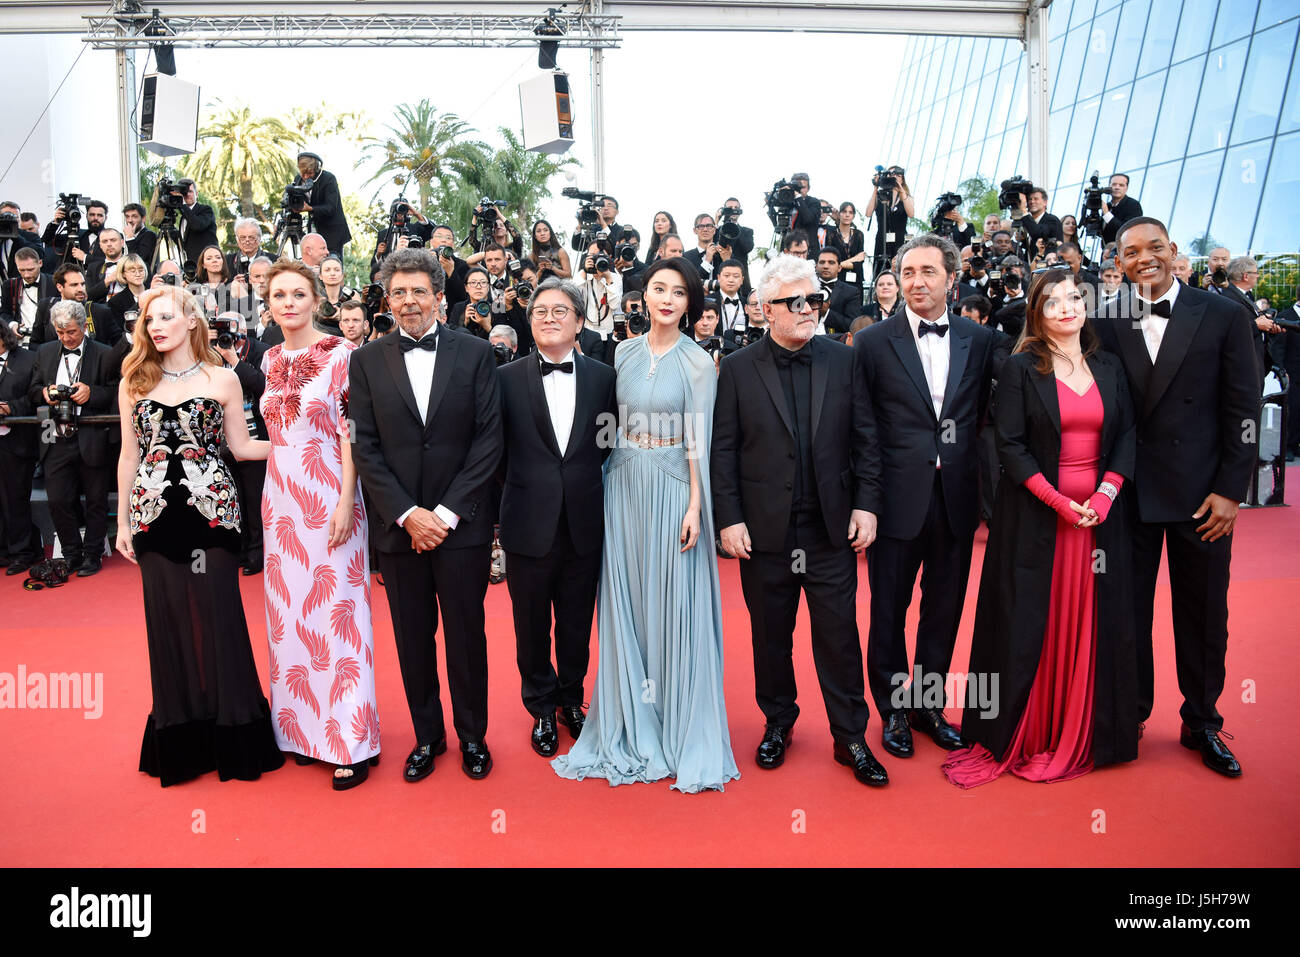 Cannes, France. 17th May, 2017. Jury members of the 70th Cannes International Film Festival Will Smith, Agnes Jaoui, Paolo Sorrentino, Pedro Almodovar, Fan Bingbing, Park Chan-wook, Gabriel Yared, Marin Ade and Jessica Chastain (R-L) pose for photos on the red carpet before the opening of the 70th Cannes International Film Festival in Cannes, France, on May 17, 2017. The 70th Cannes International Film Festival is held from May 17 to May 28. (Xinhua/Chen Yichen)(bxf) Credit: Xinhua/Alamy Live News Stock Photo